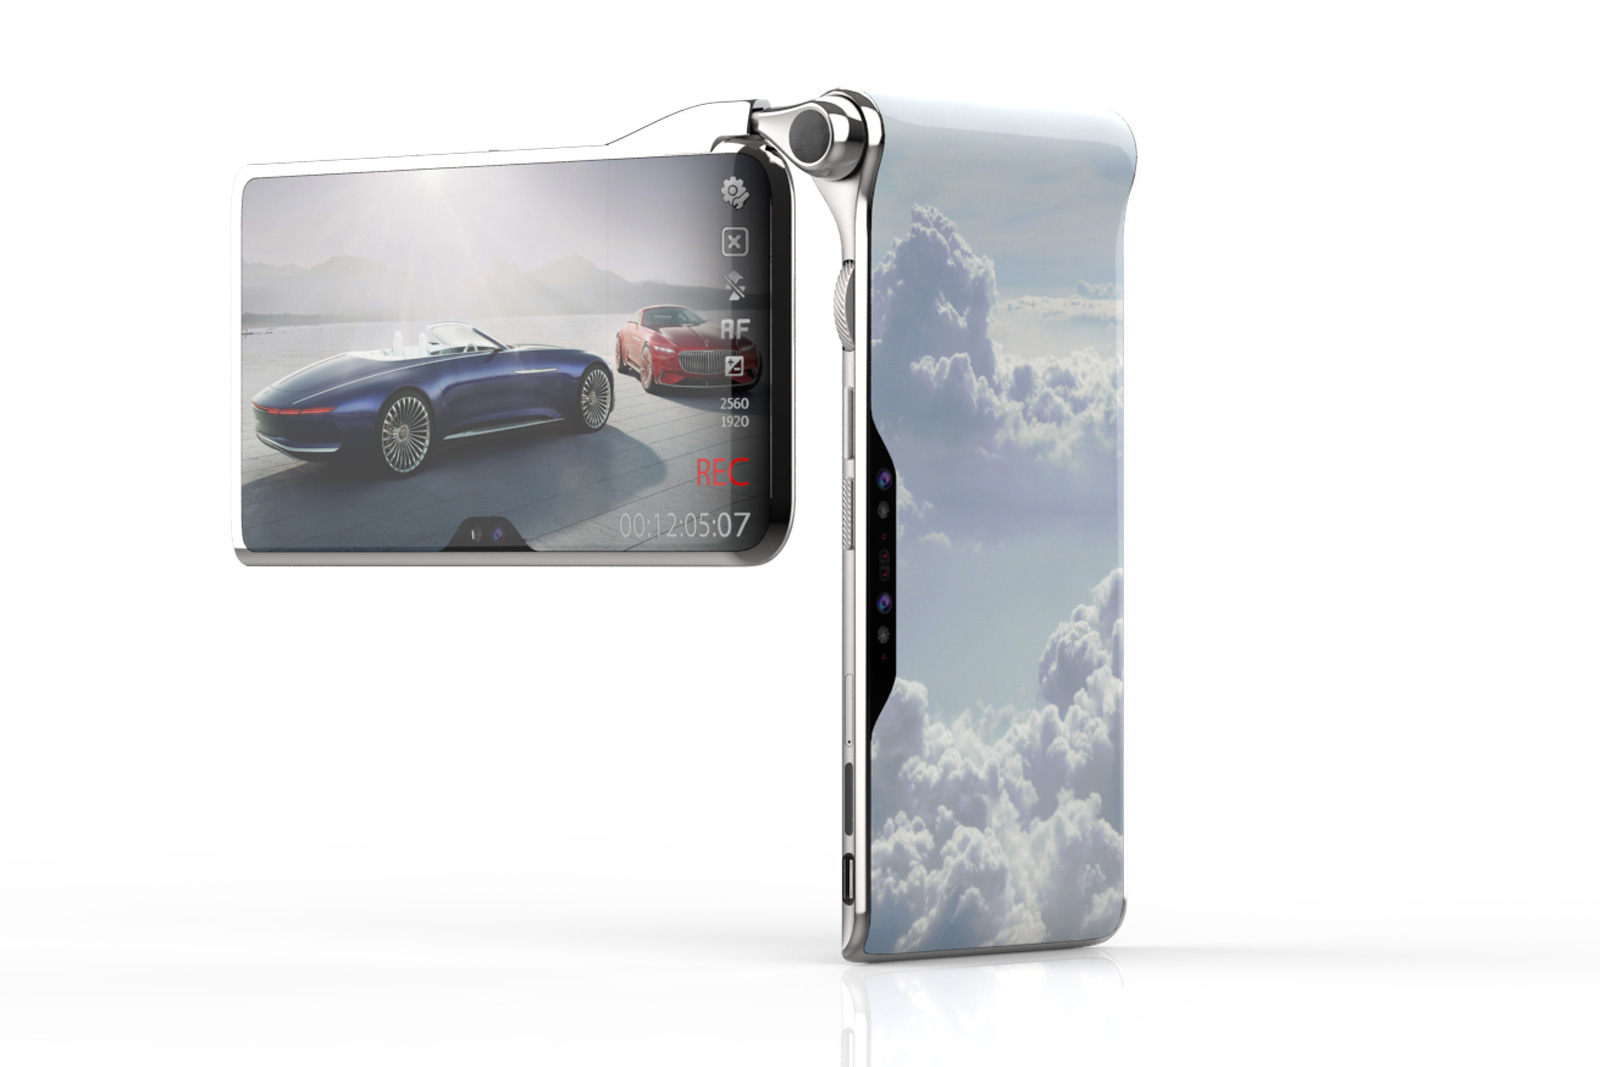 Turing Hubblephone prototype images surface; same as the concept 1